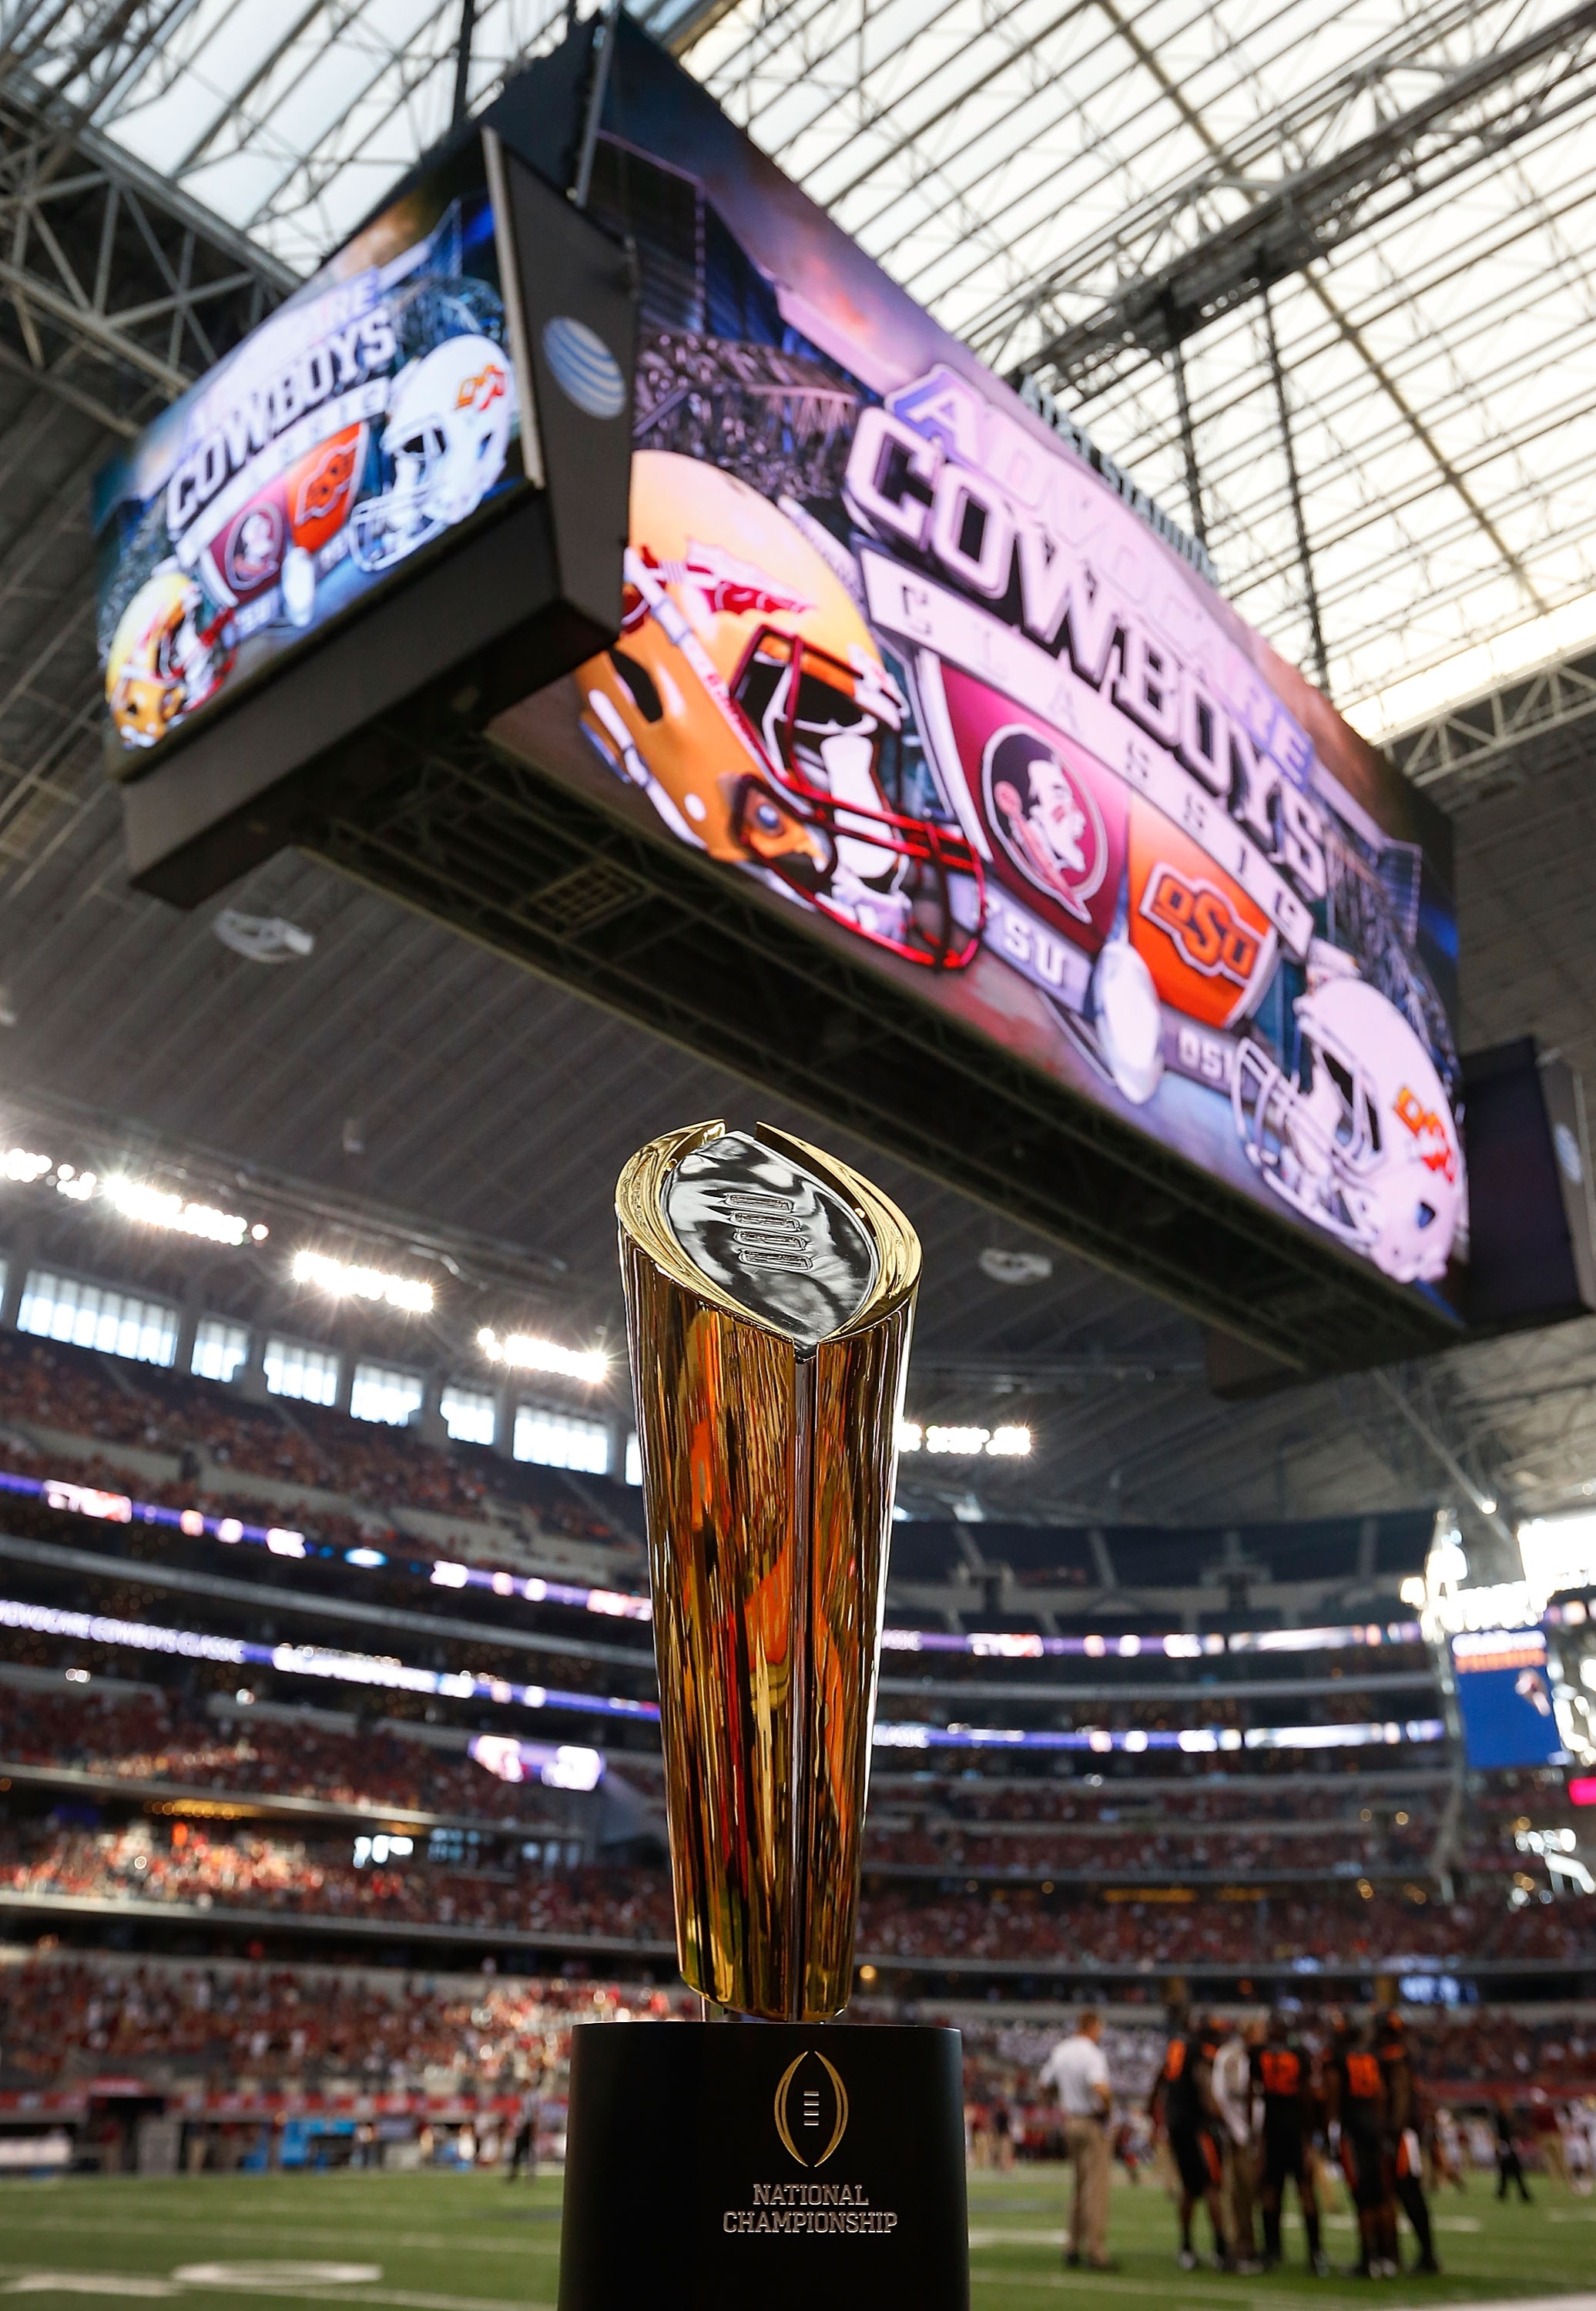 ARLINGTON, TX - AUGUST 30: The NCAA National Championship trophy is on display before the start of the game between the Oklahoma State Cowboys and the Florida State Seminoles in the Advocare Cowboys Classic at AT&T Stadium on August 30, 2014 in Arlington, Texas. (Photo by Tom Pennington/Getty Images)